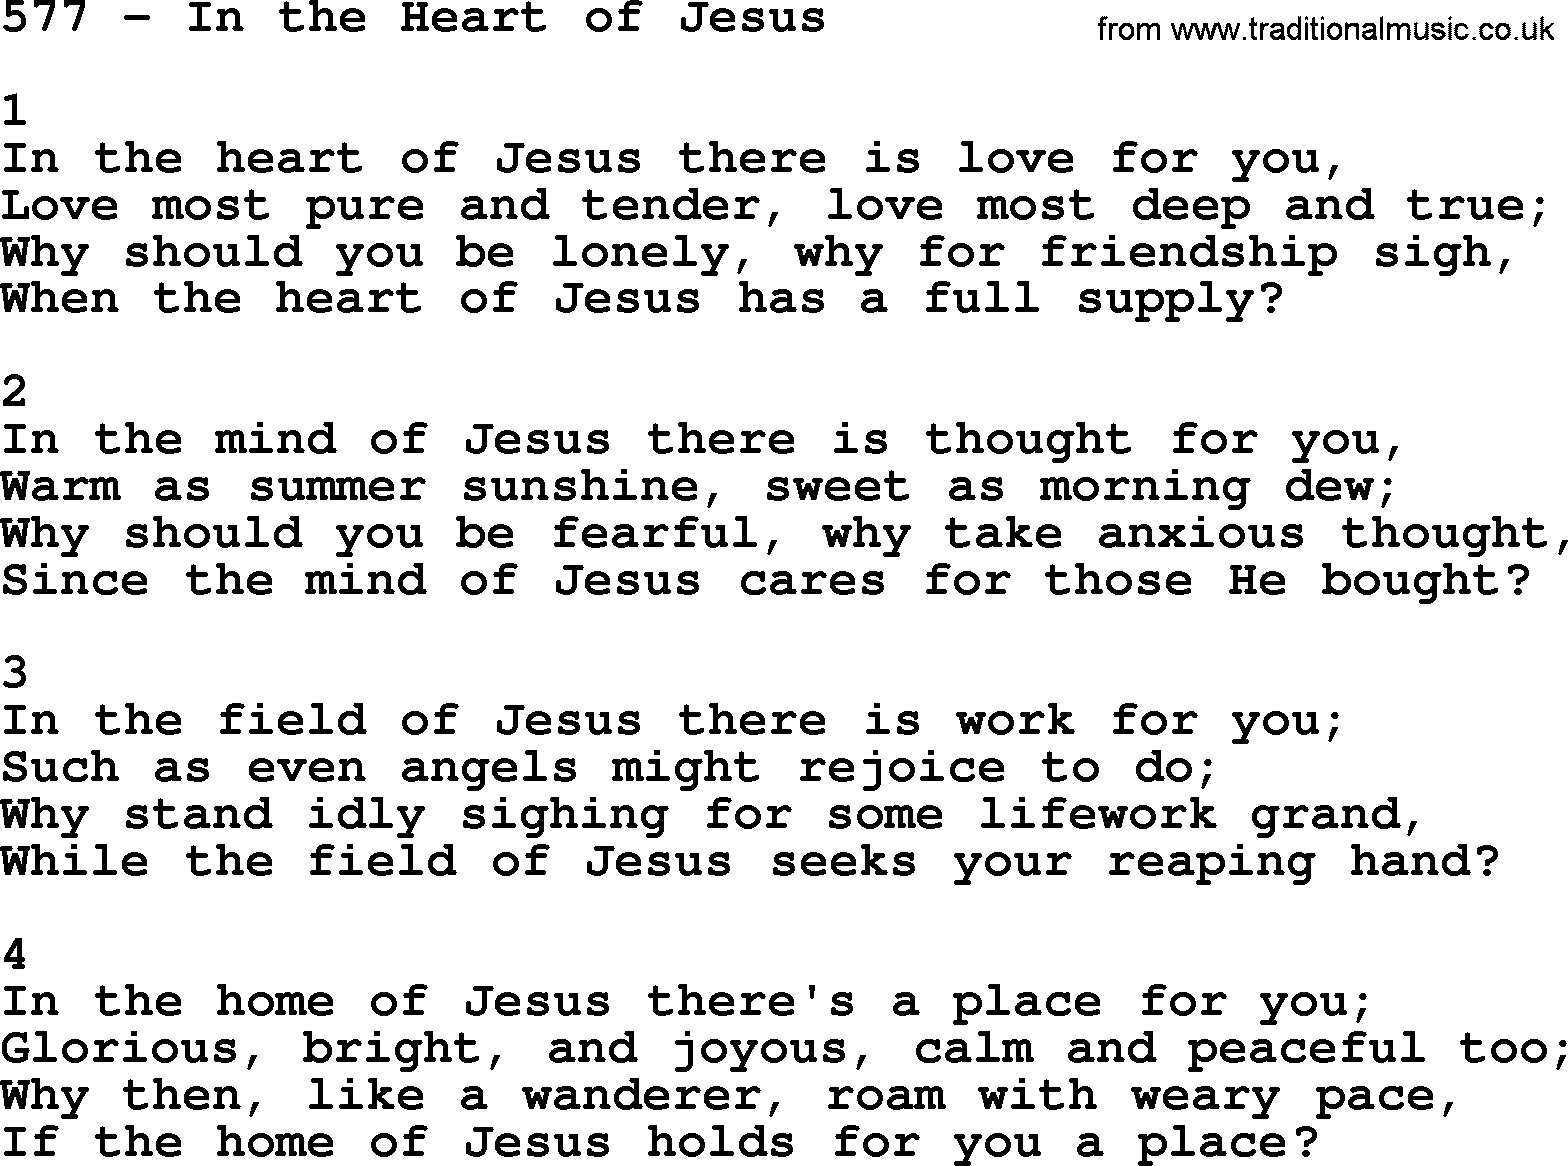 Complete Adventis Hymnal, title: 577-In The Heart Of Jesus, with lyrics, midi, mp3, powerpoints(PPT) and PDF,